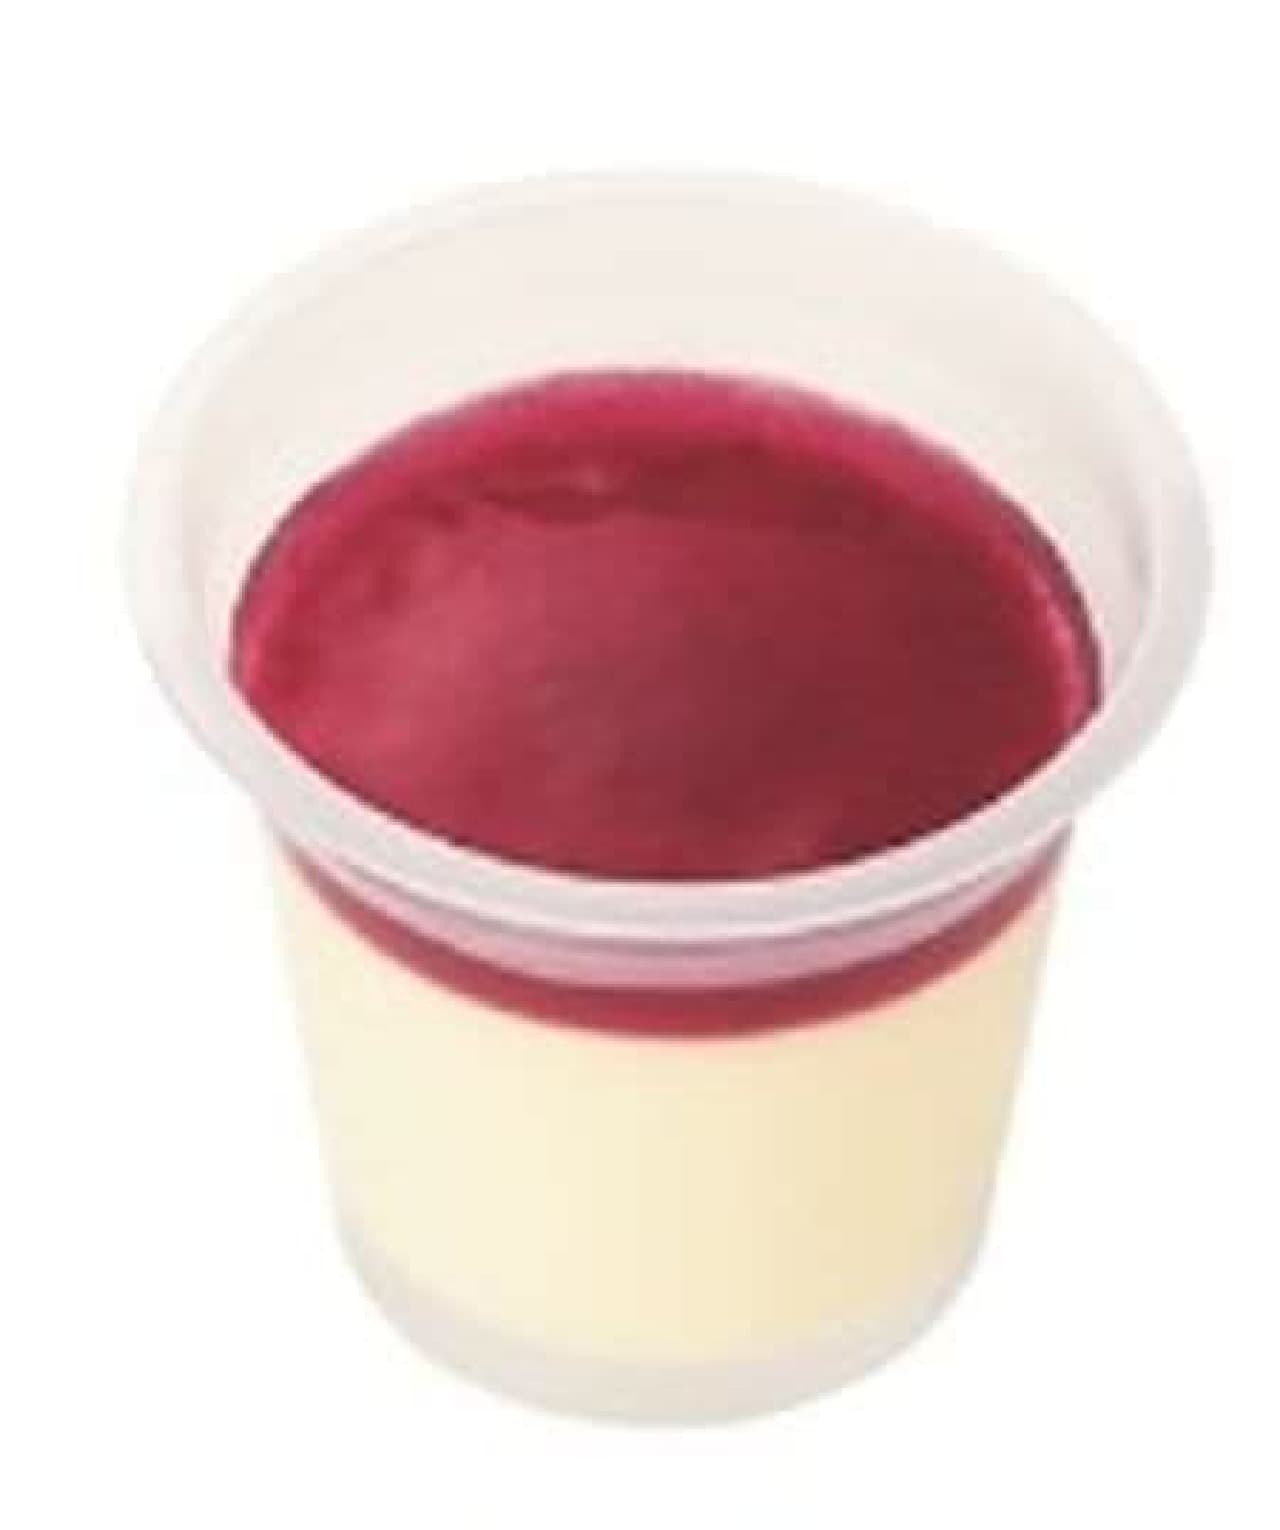 "RIZAP Rich Cheesecake ~ Mixed Berry Sauce ~" is a rich cheesecake with mixed berry sauce.